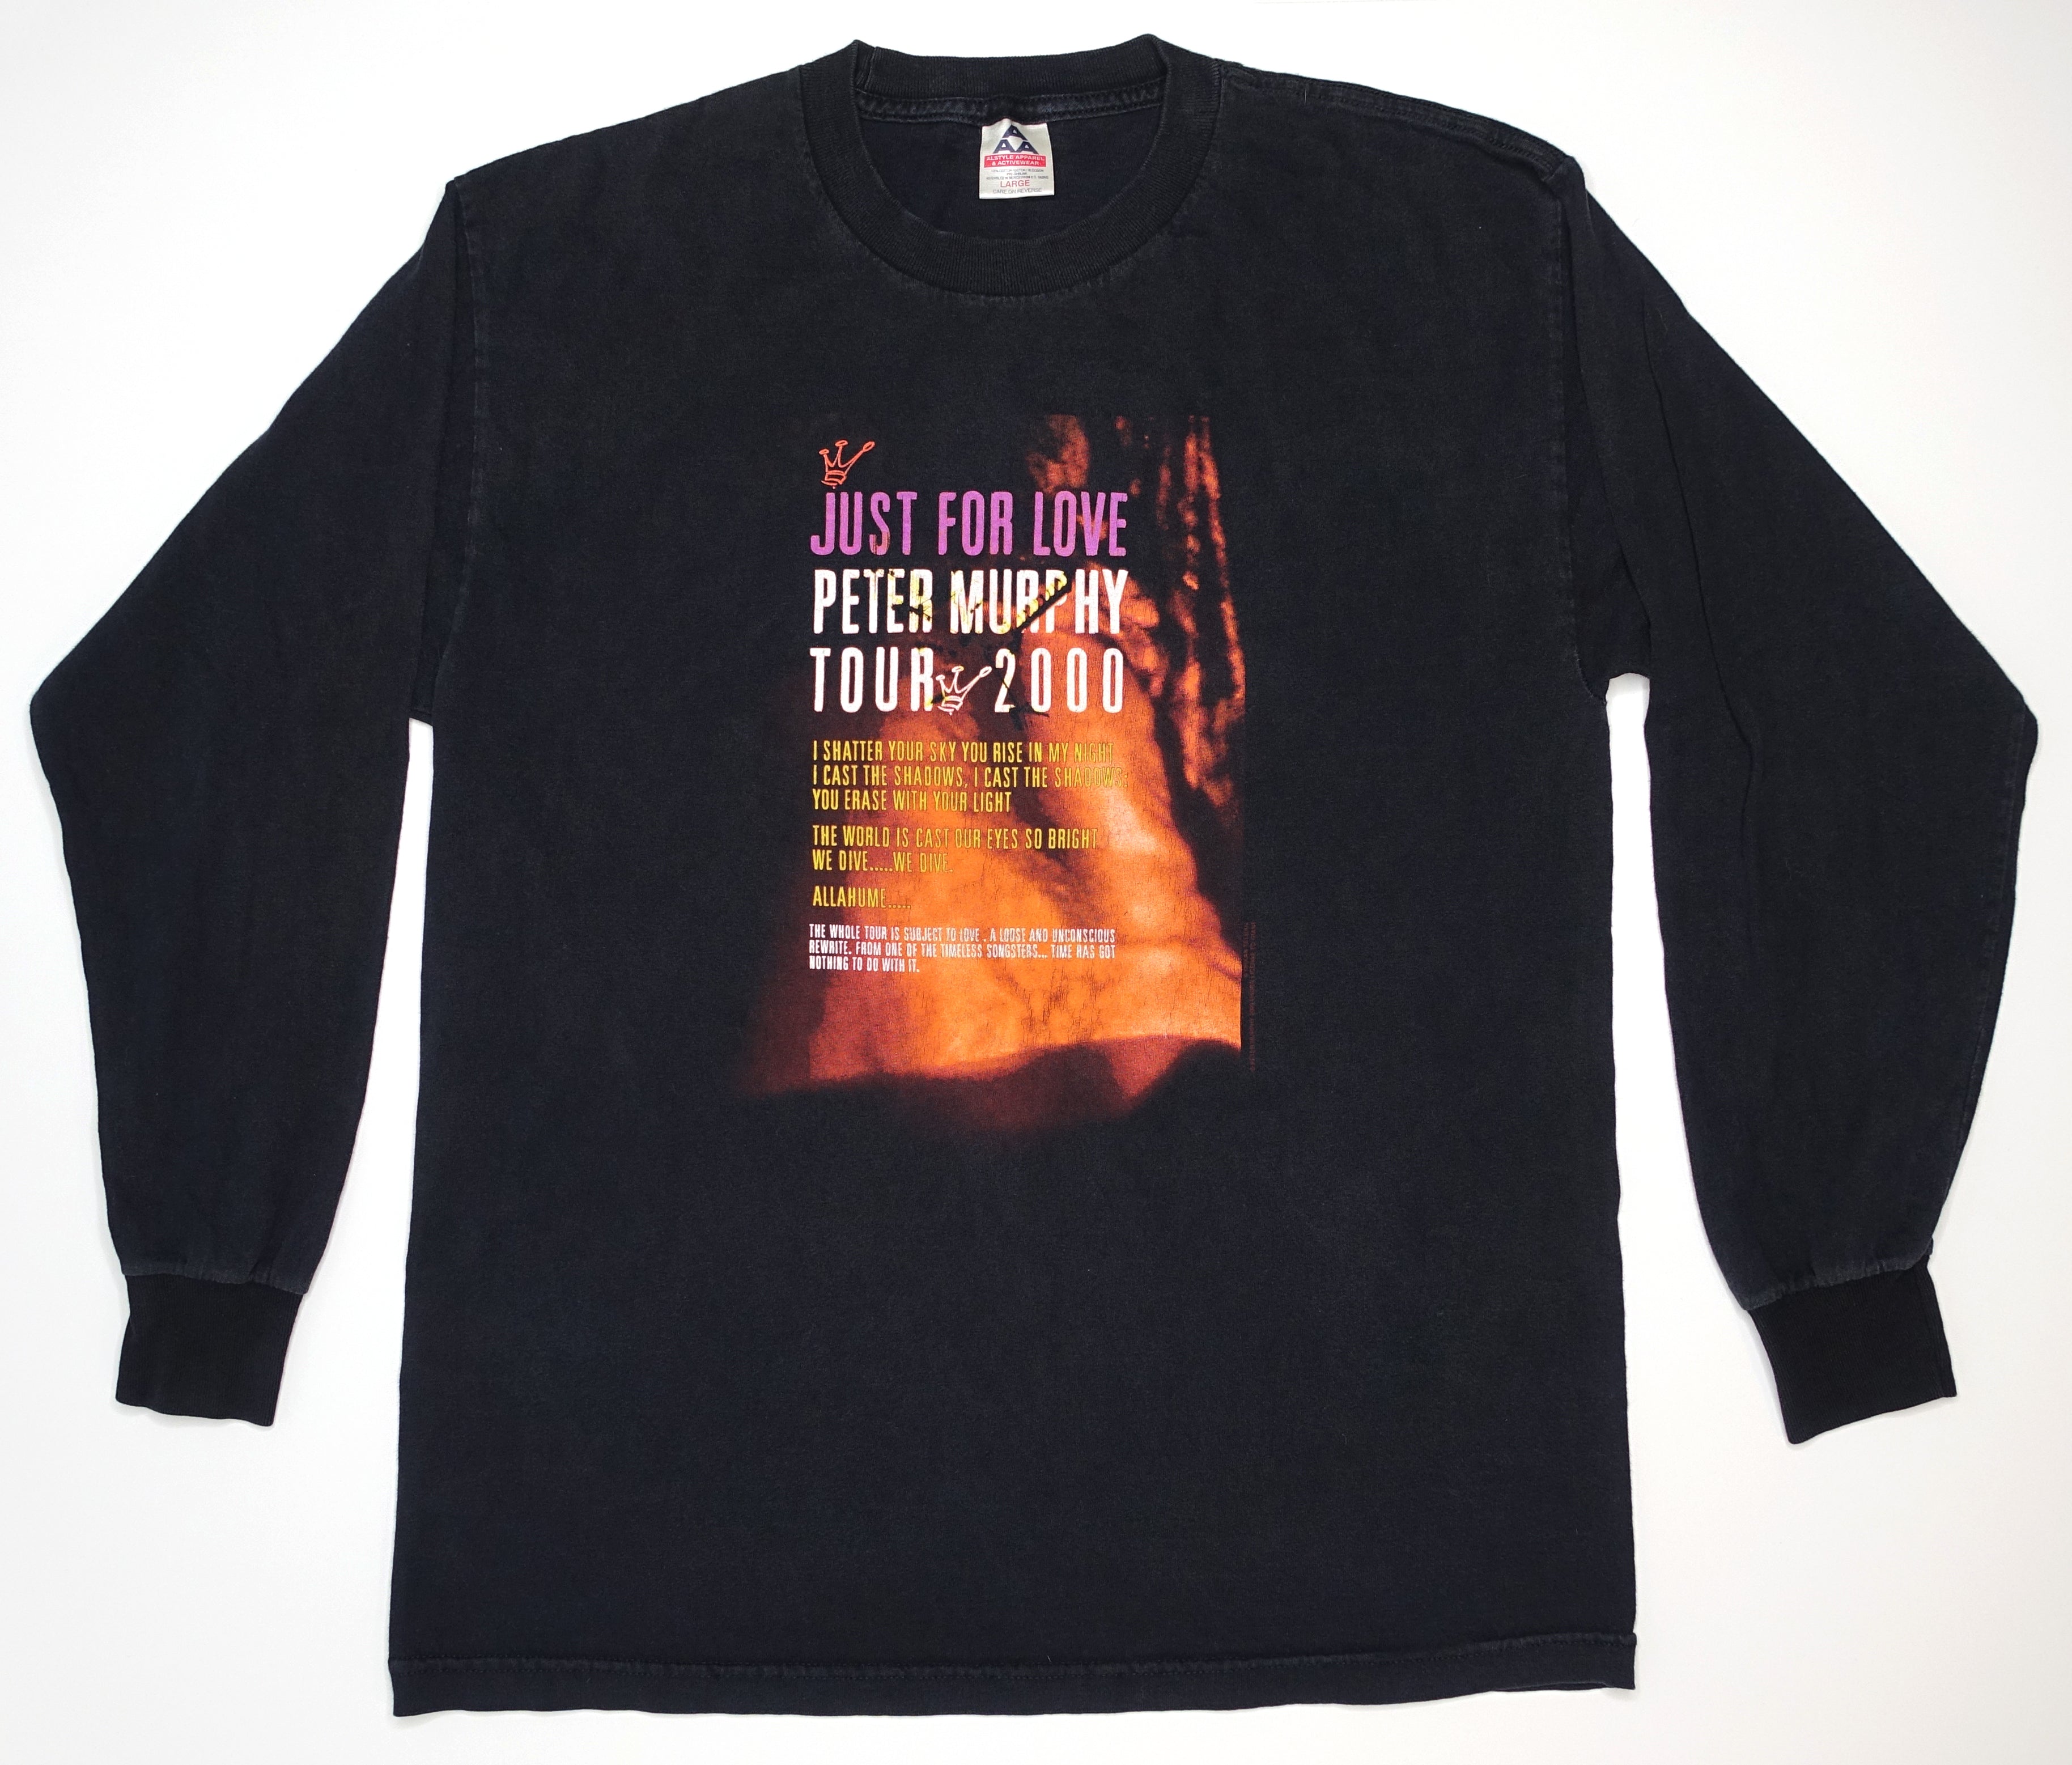 Peter Murphy - Just For Love 2000 Tour Long Sleeve Shirt Size Large